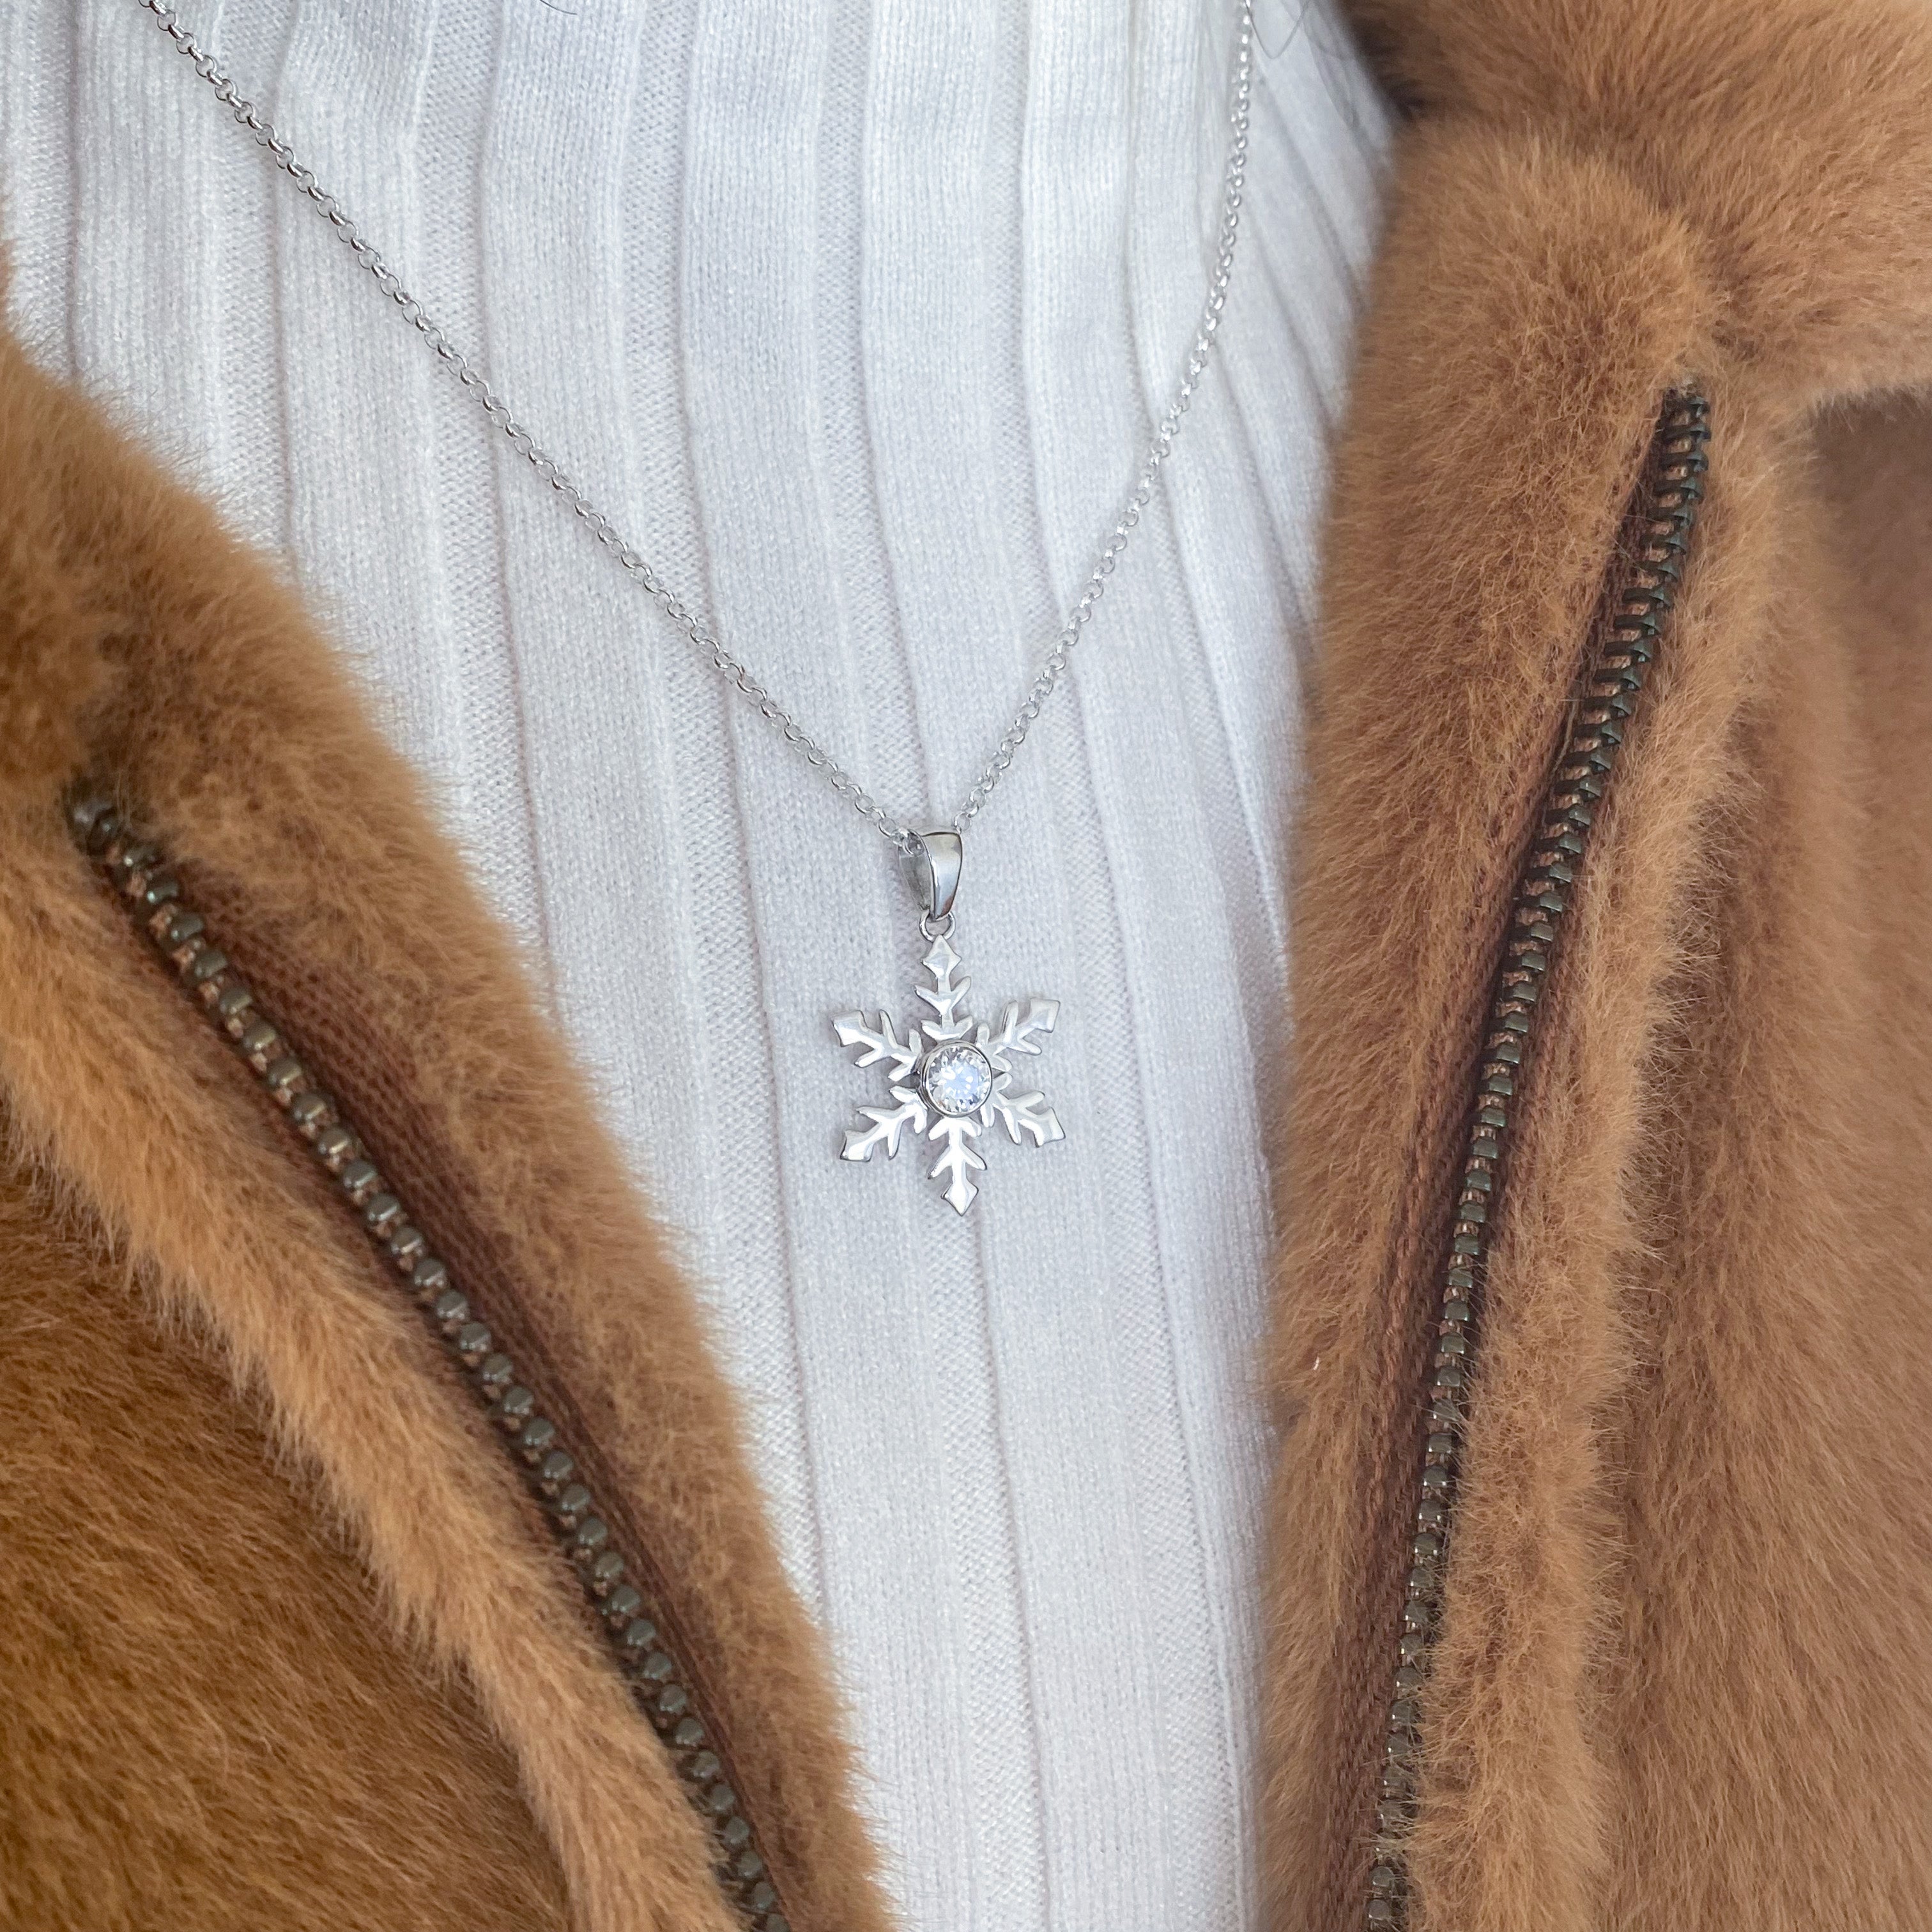 Snowflake Necklace with Cubic Zirconia